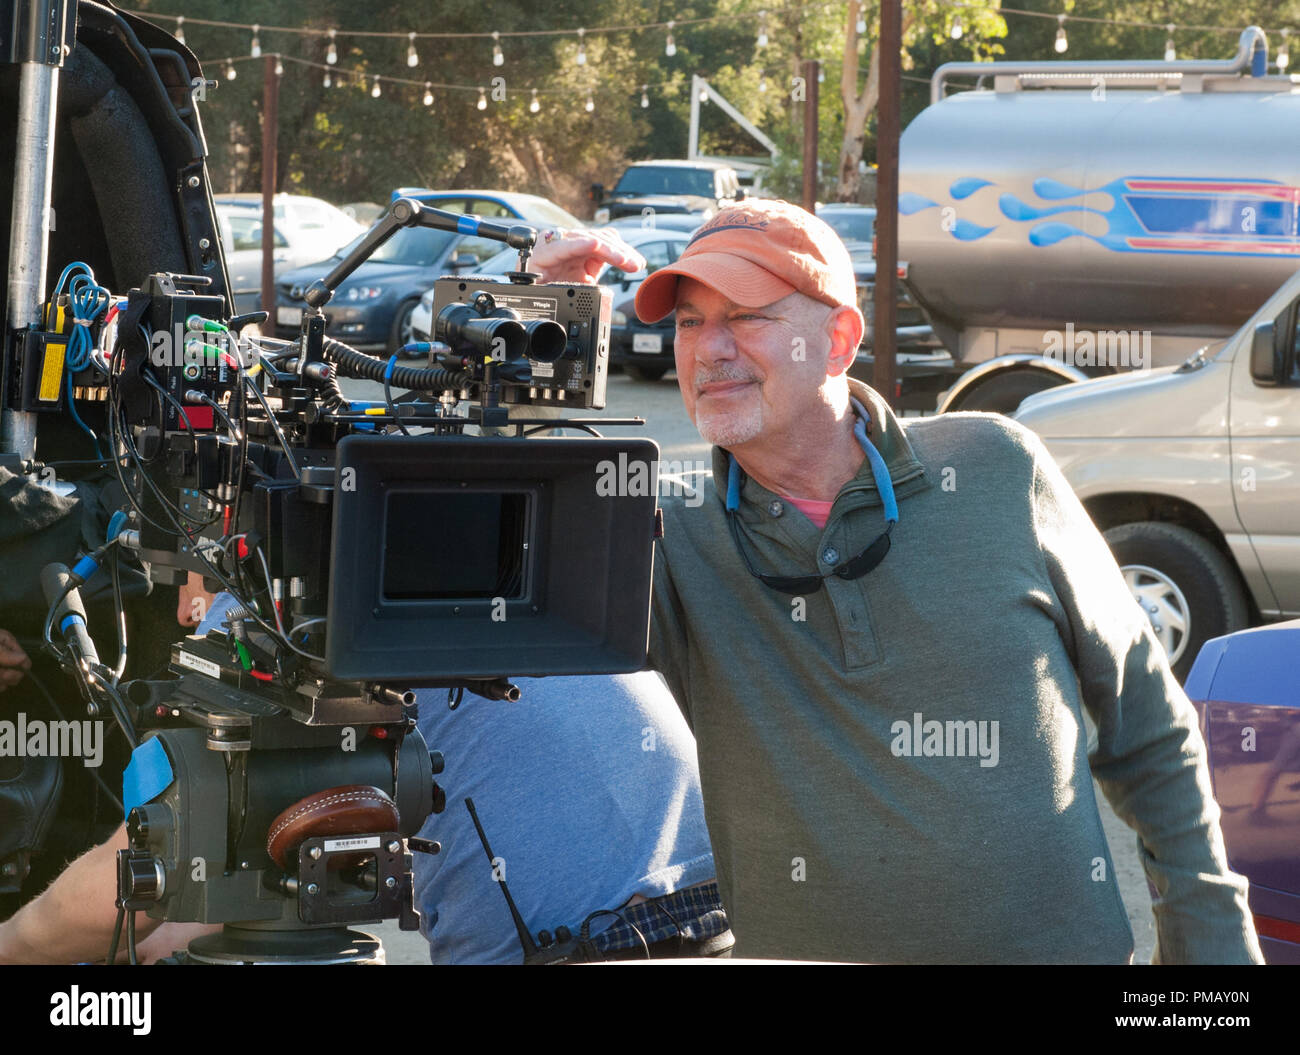 Director ROB COHEN on the set of 'The Boy Next Door' Stock Photo